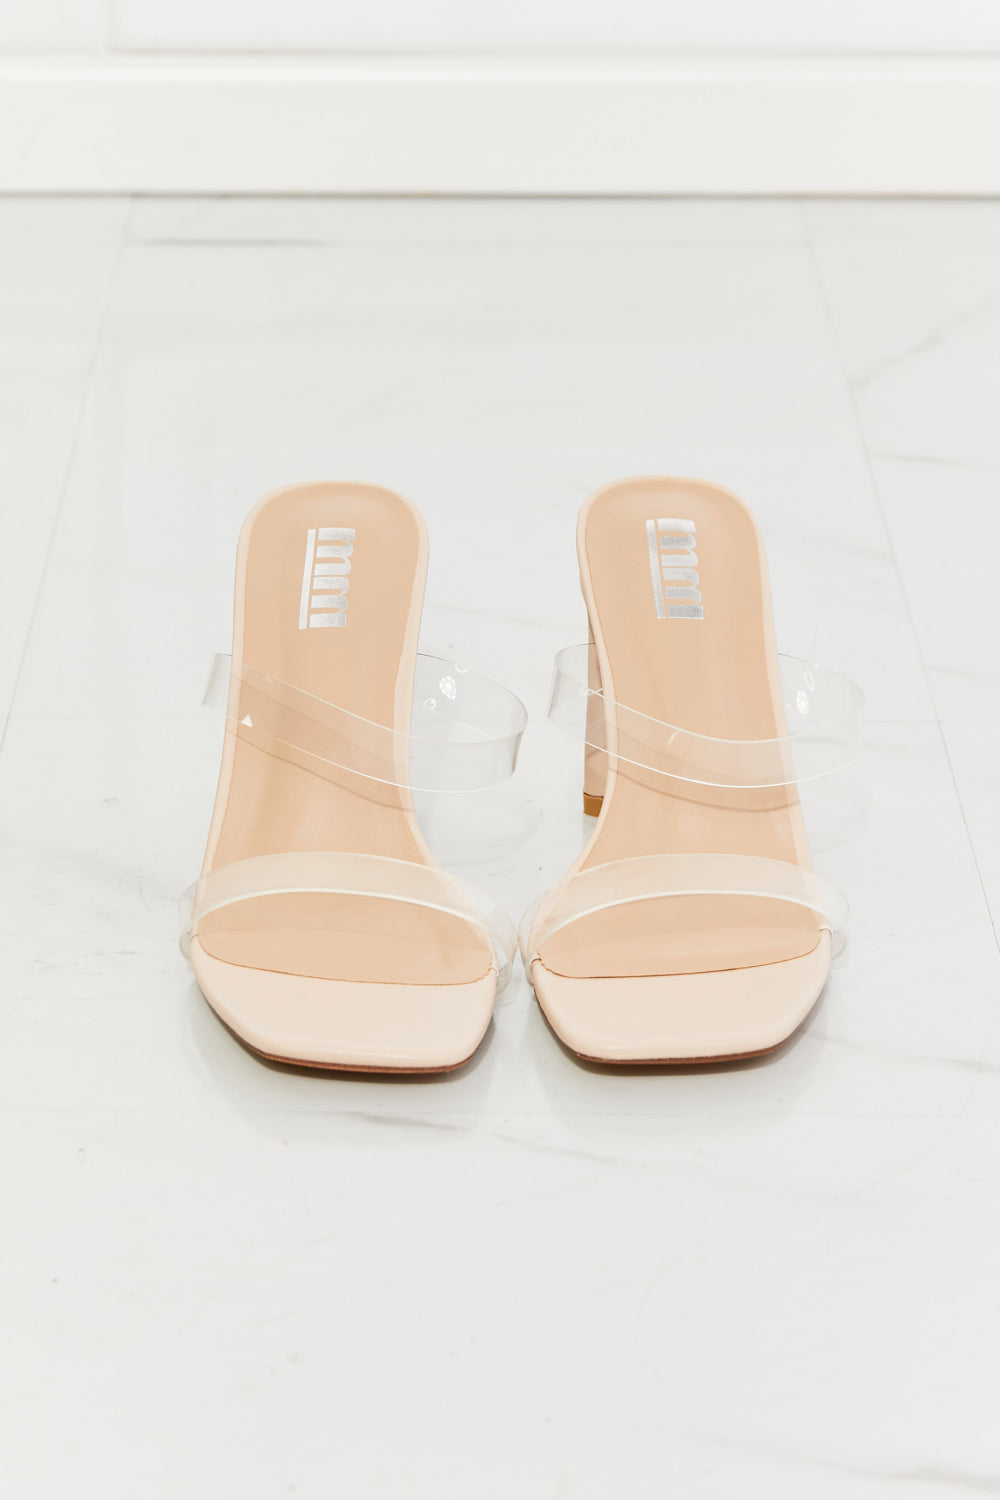 MMShoes Clear Transparent Double Band Heeled Sandal (In-Store)